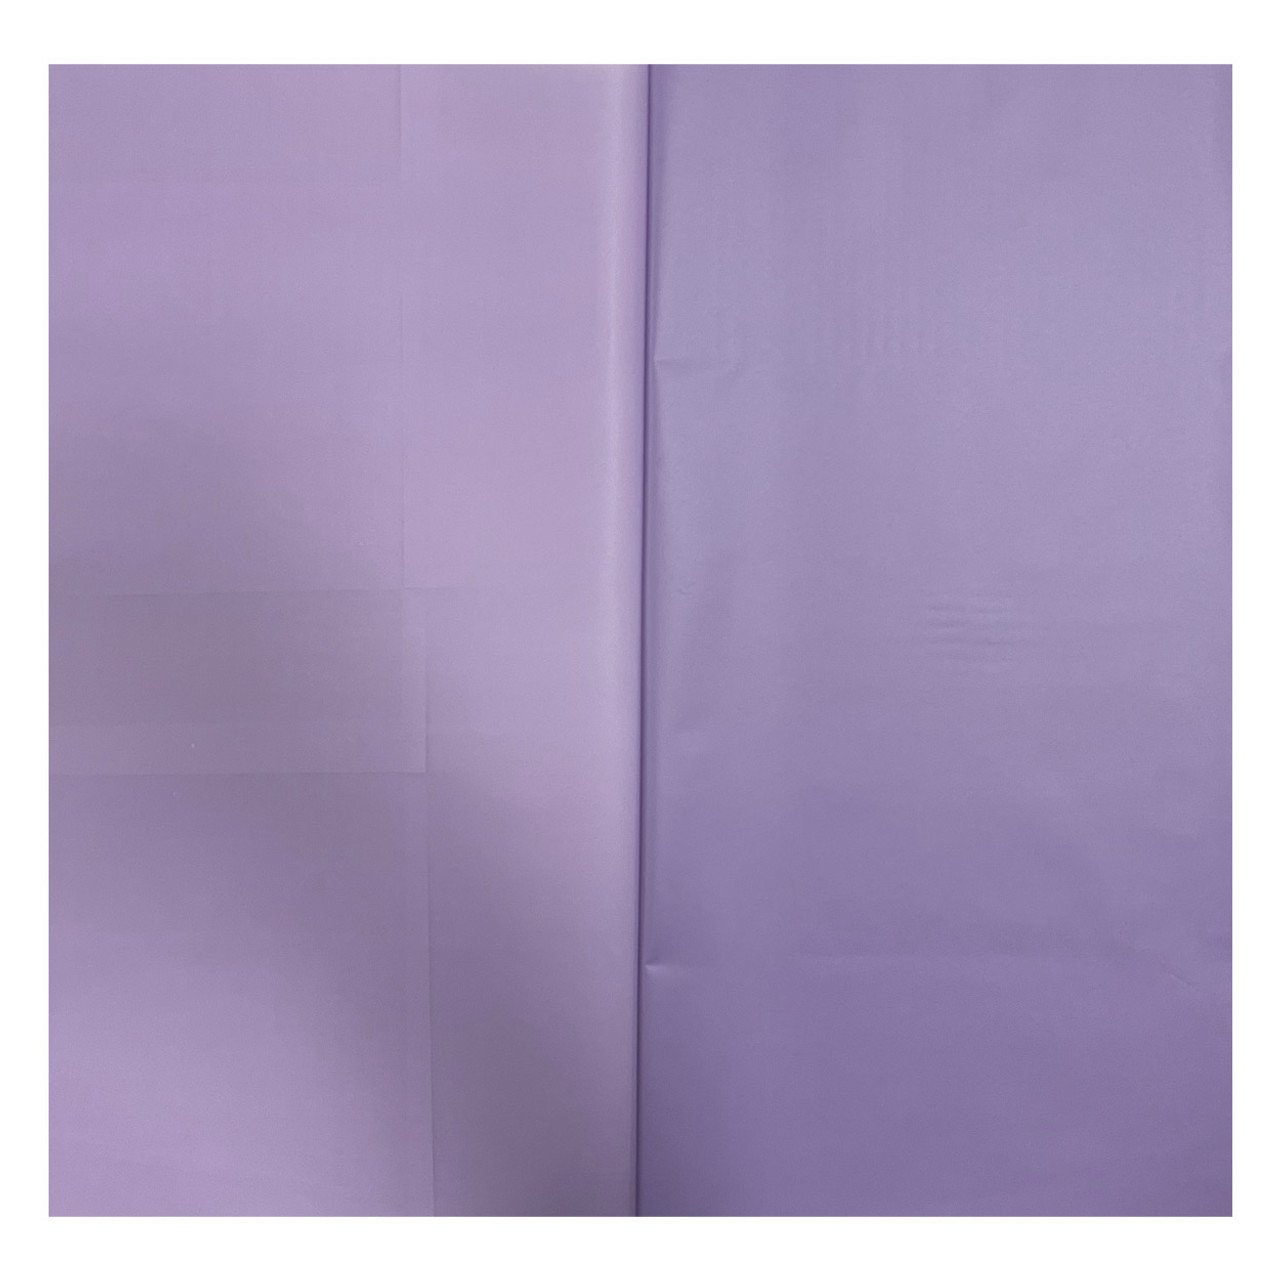 Lavender Floral Wrapping Paper - 20 Sheets